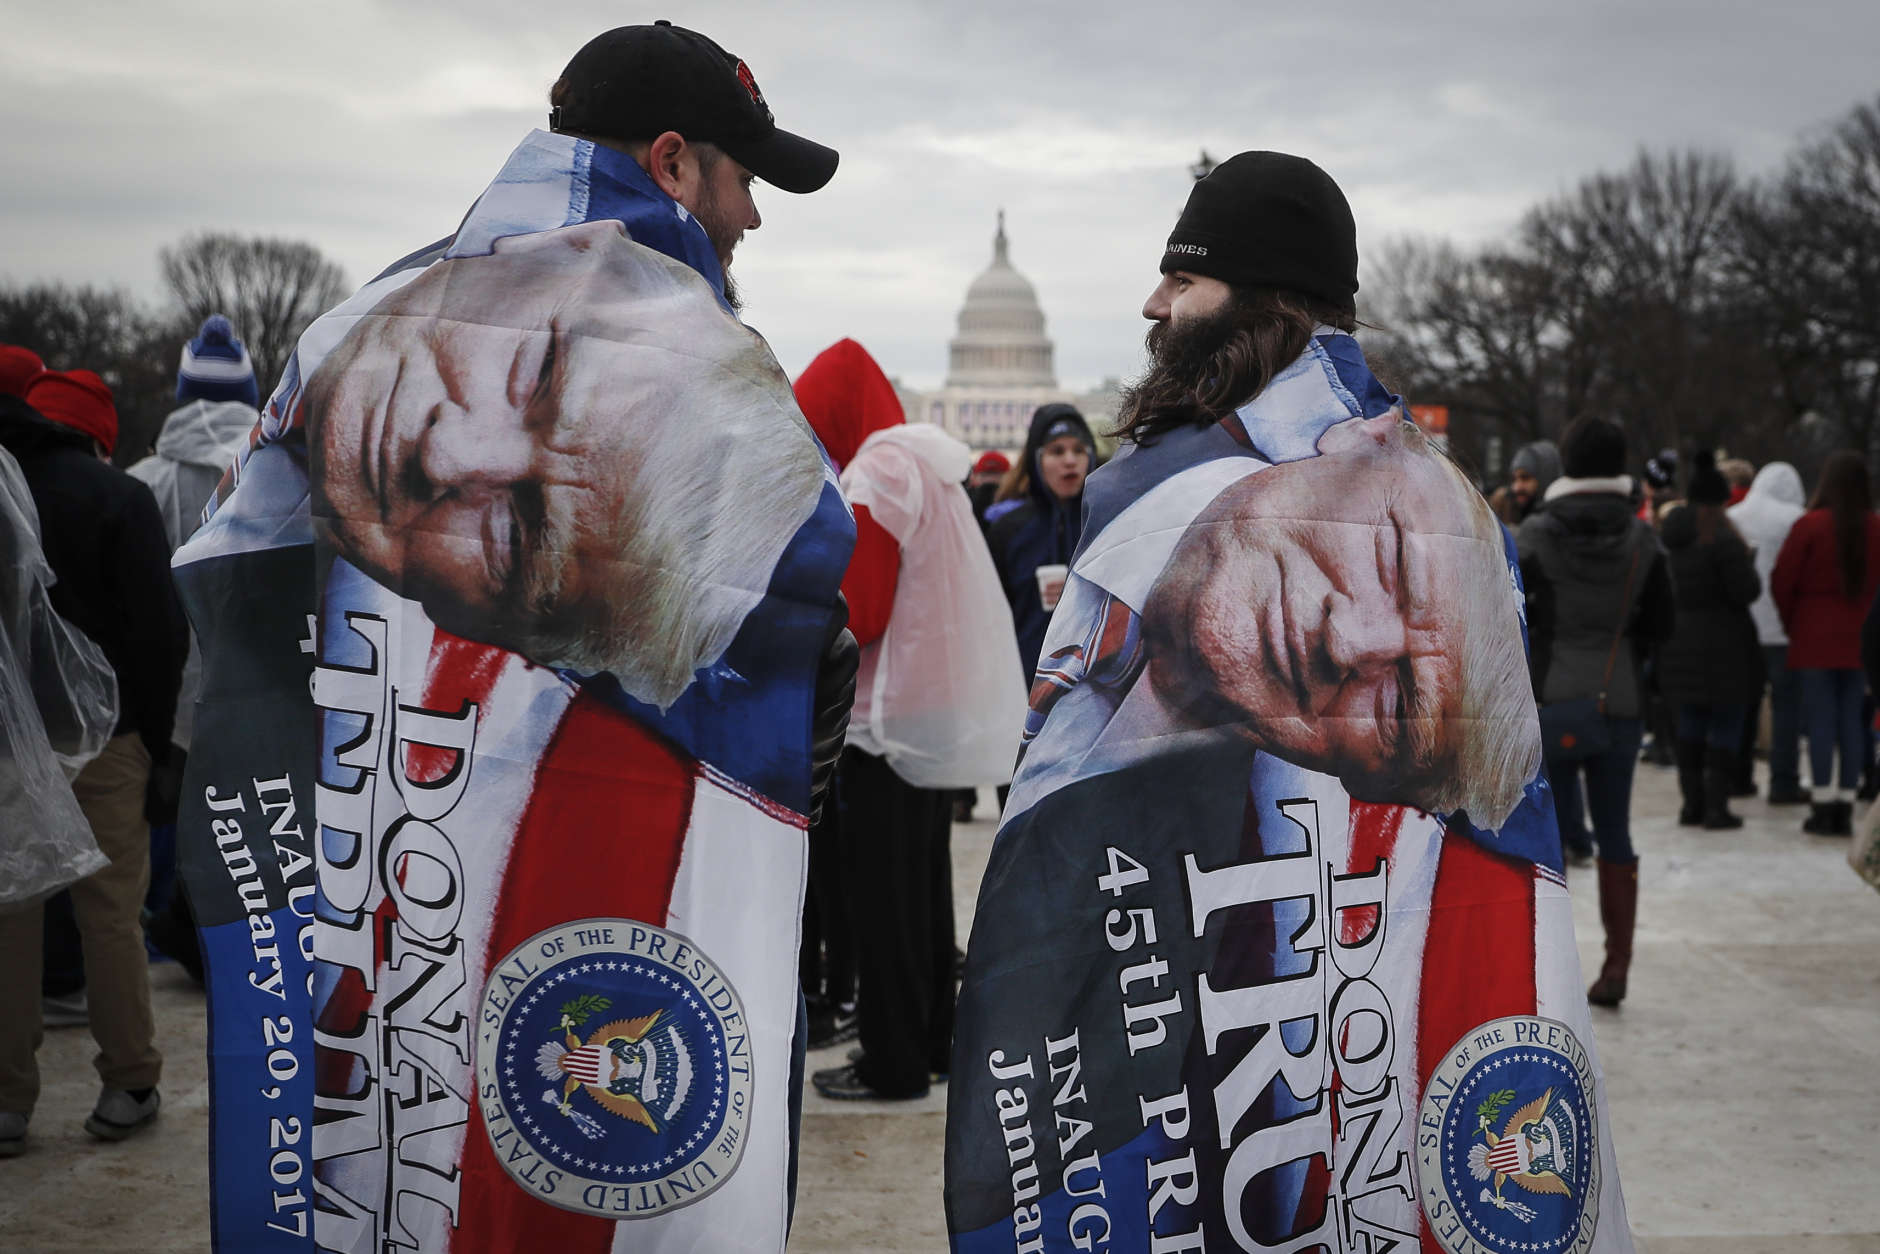 Spectators gather on the National Mall in Washington, Friday, Jan. 20, 2017, before the presidential inauguration of Donald Trump as the 45th president of the United States. (AP Photo/John Minchillo)